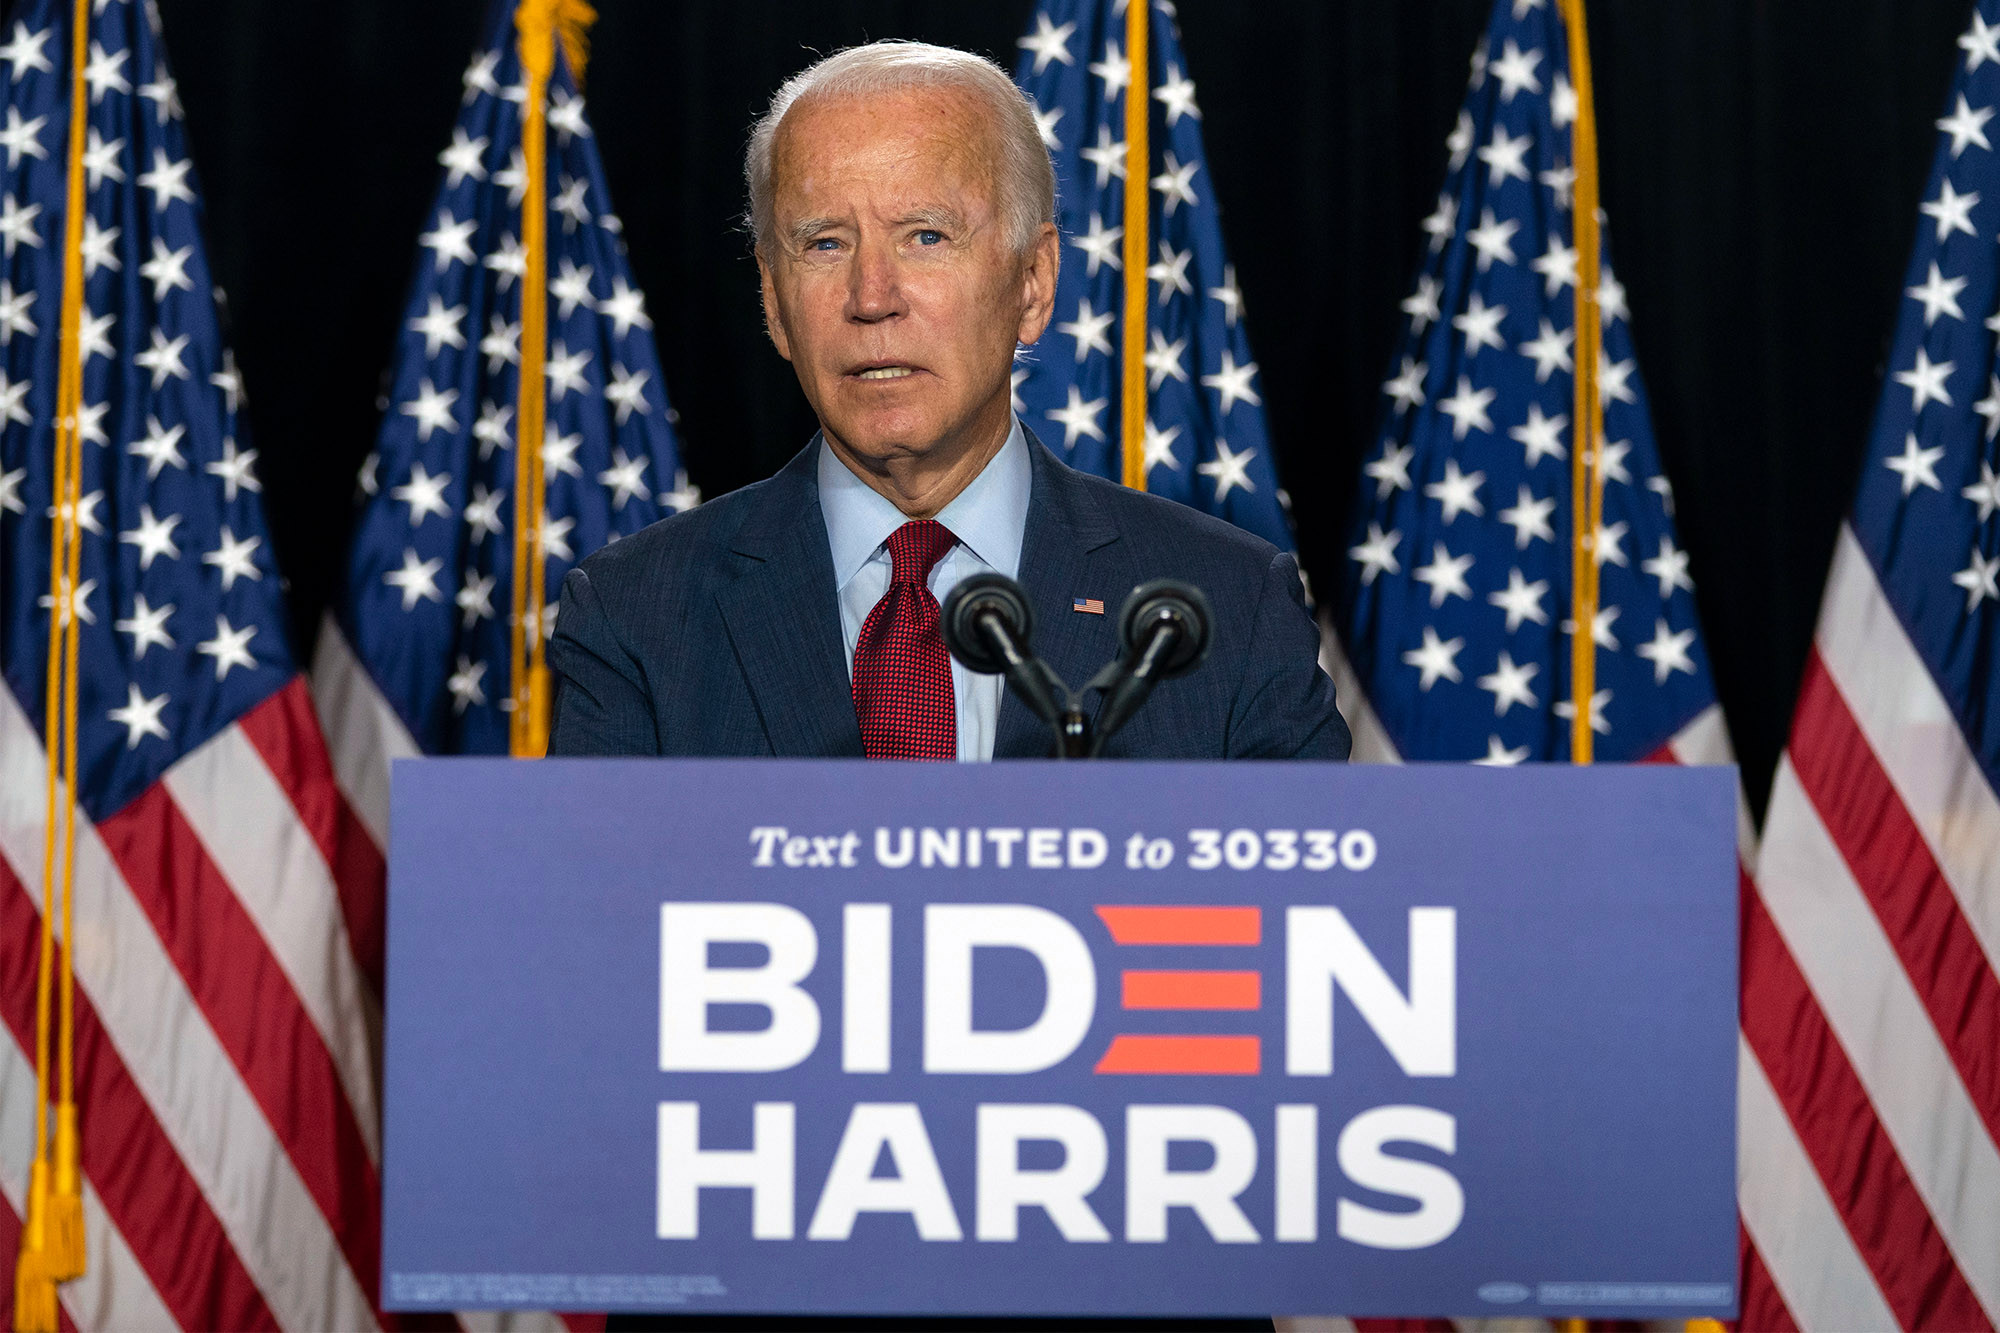 Biden campaign advisers court top lobbyists for DNC fundraising